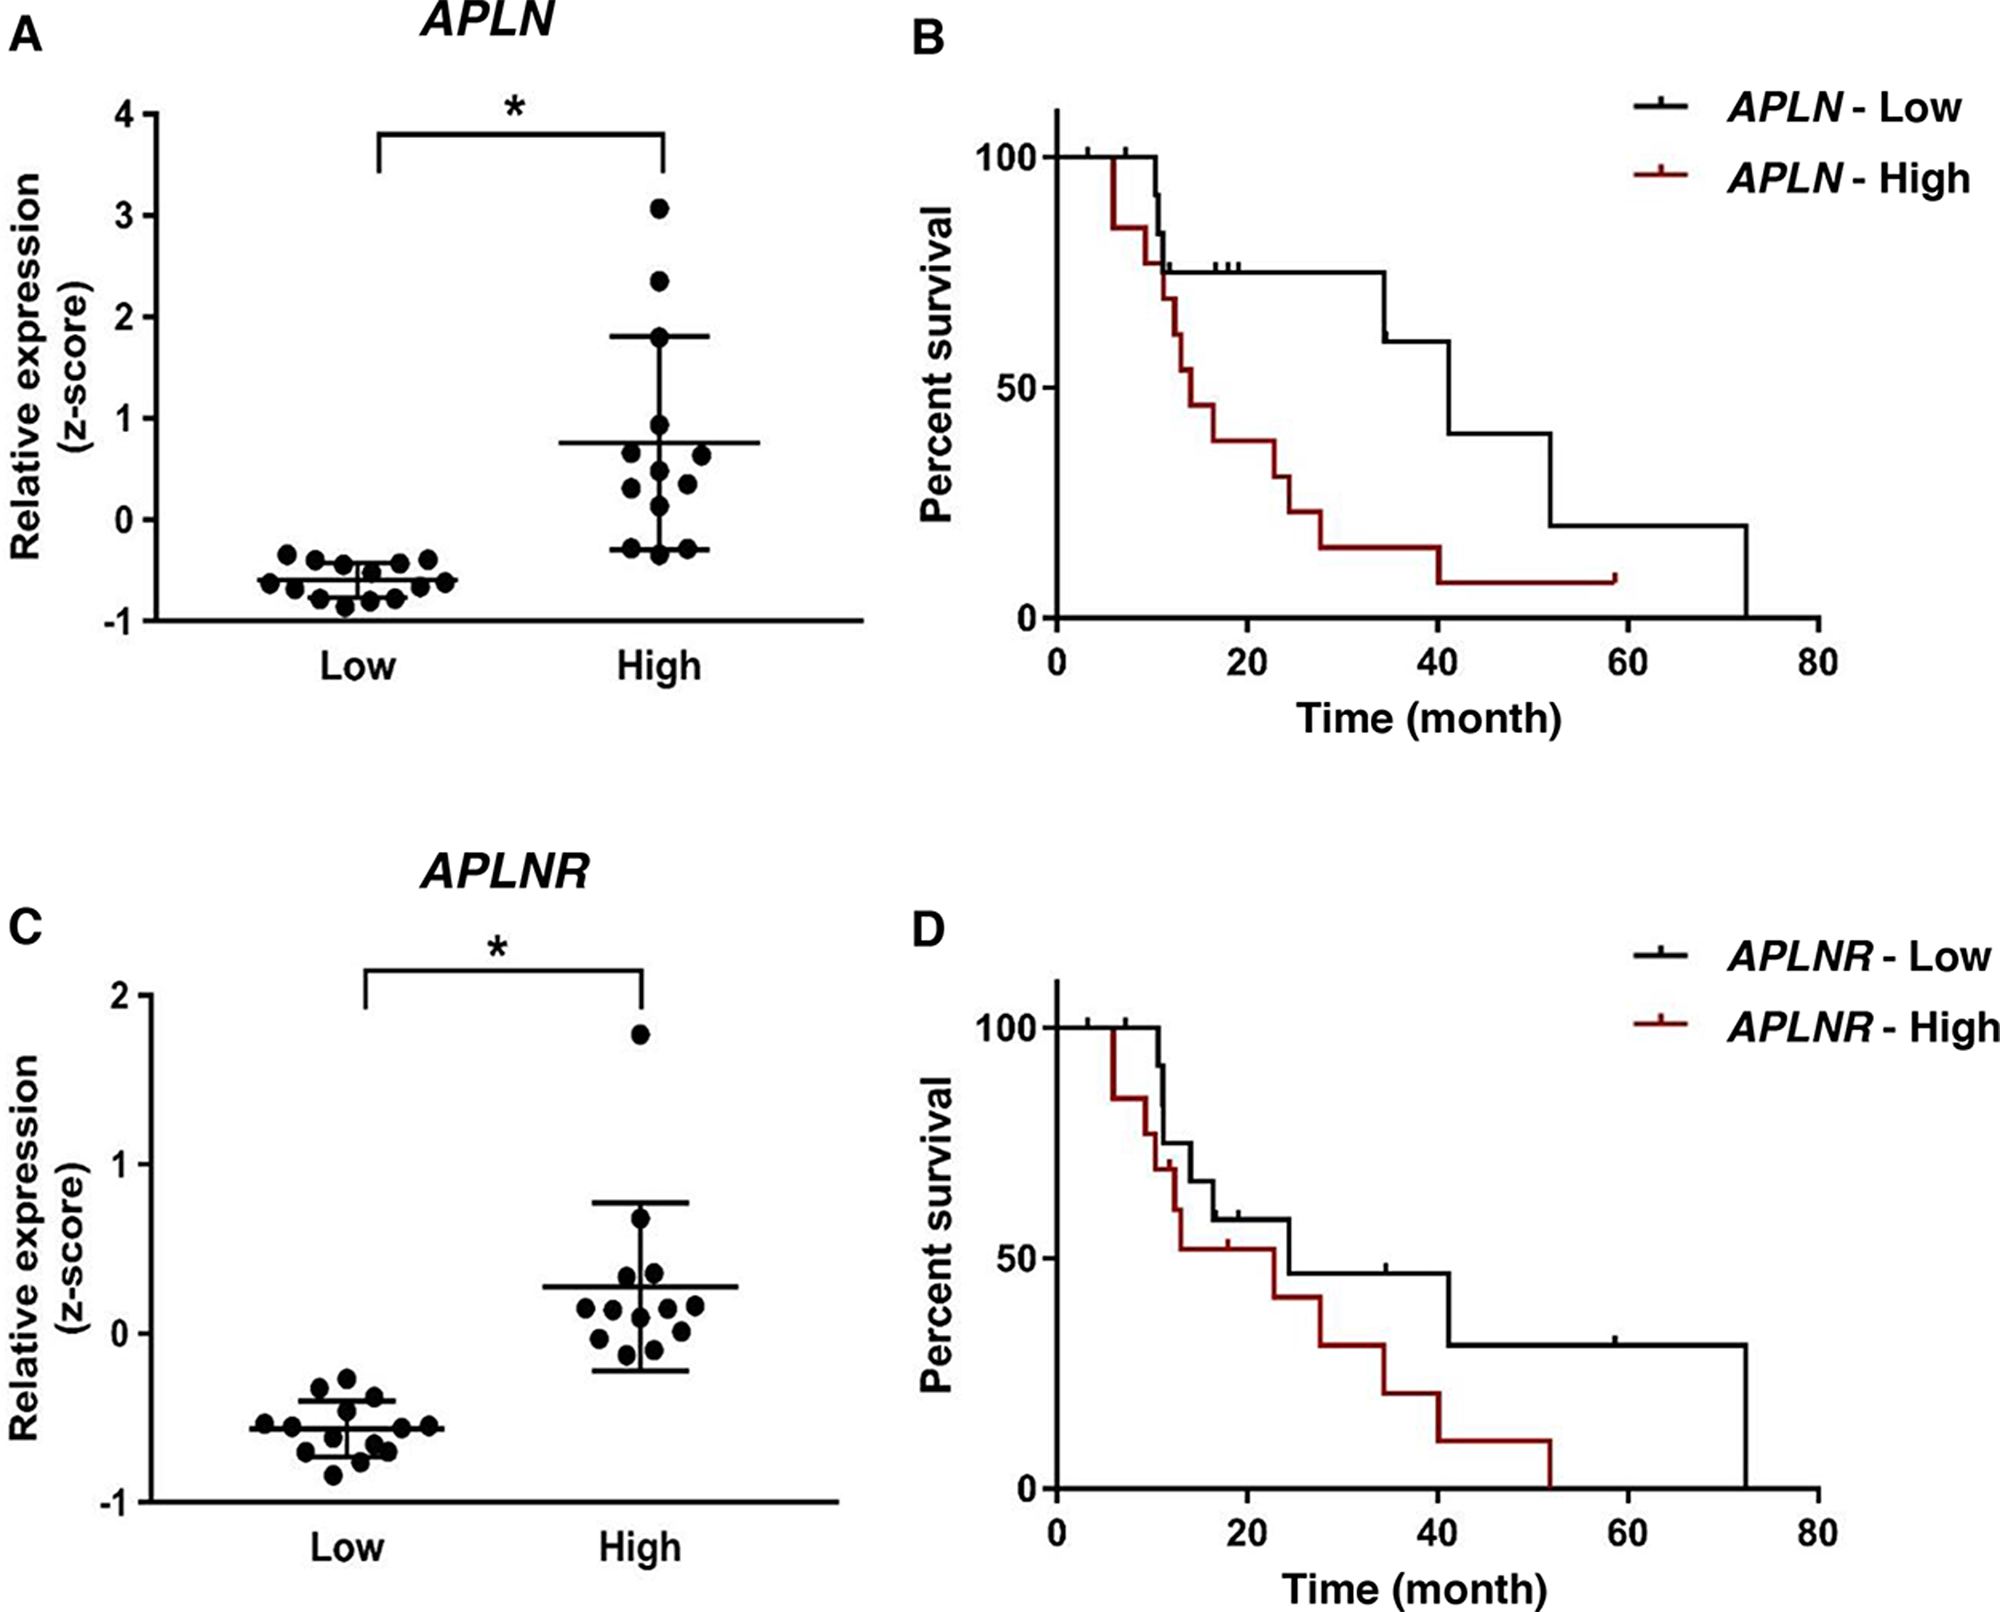 Figure 5:  APLN overexpression correlates with worsened prognosis in ovarian cancer patients treated with bevacizumab.